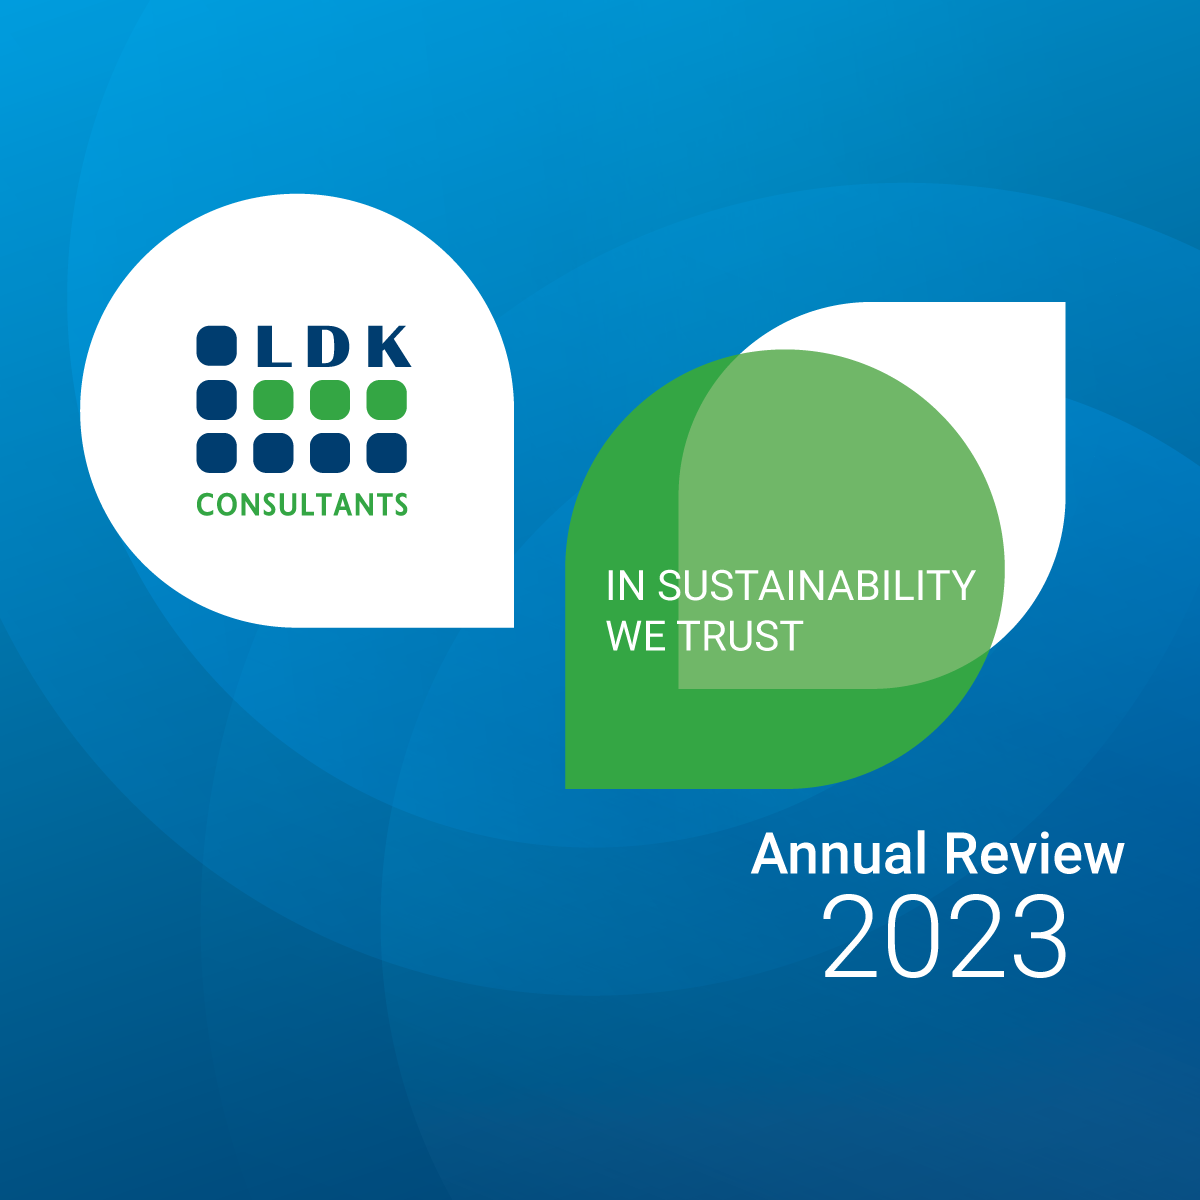 The LDK Consultants Annual Review 2023 was just published!